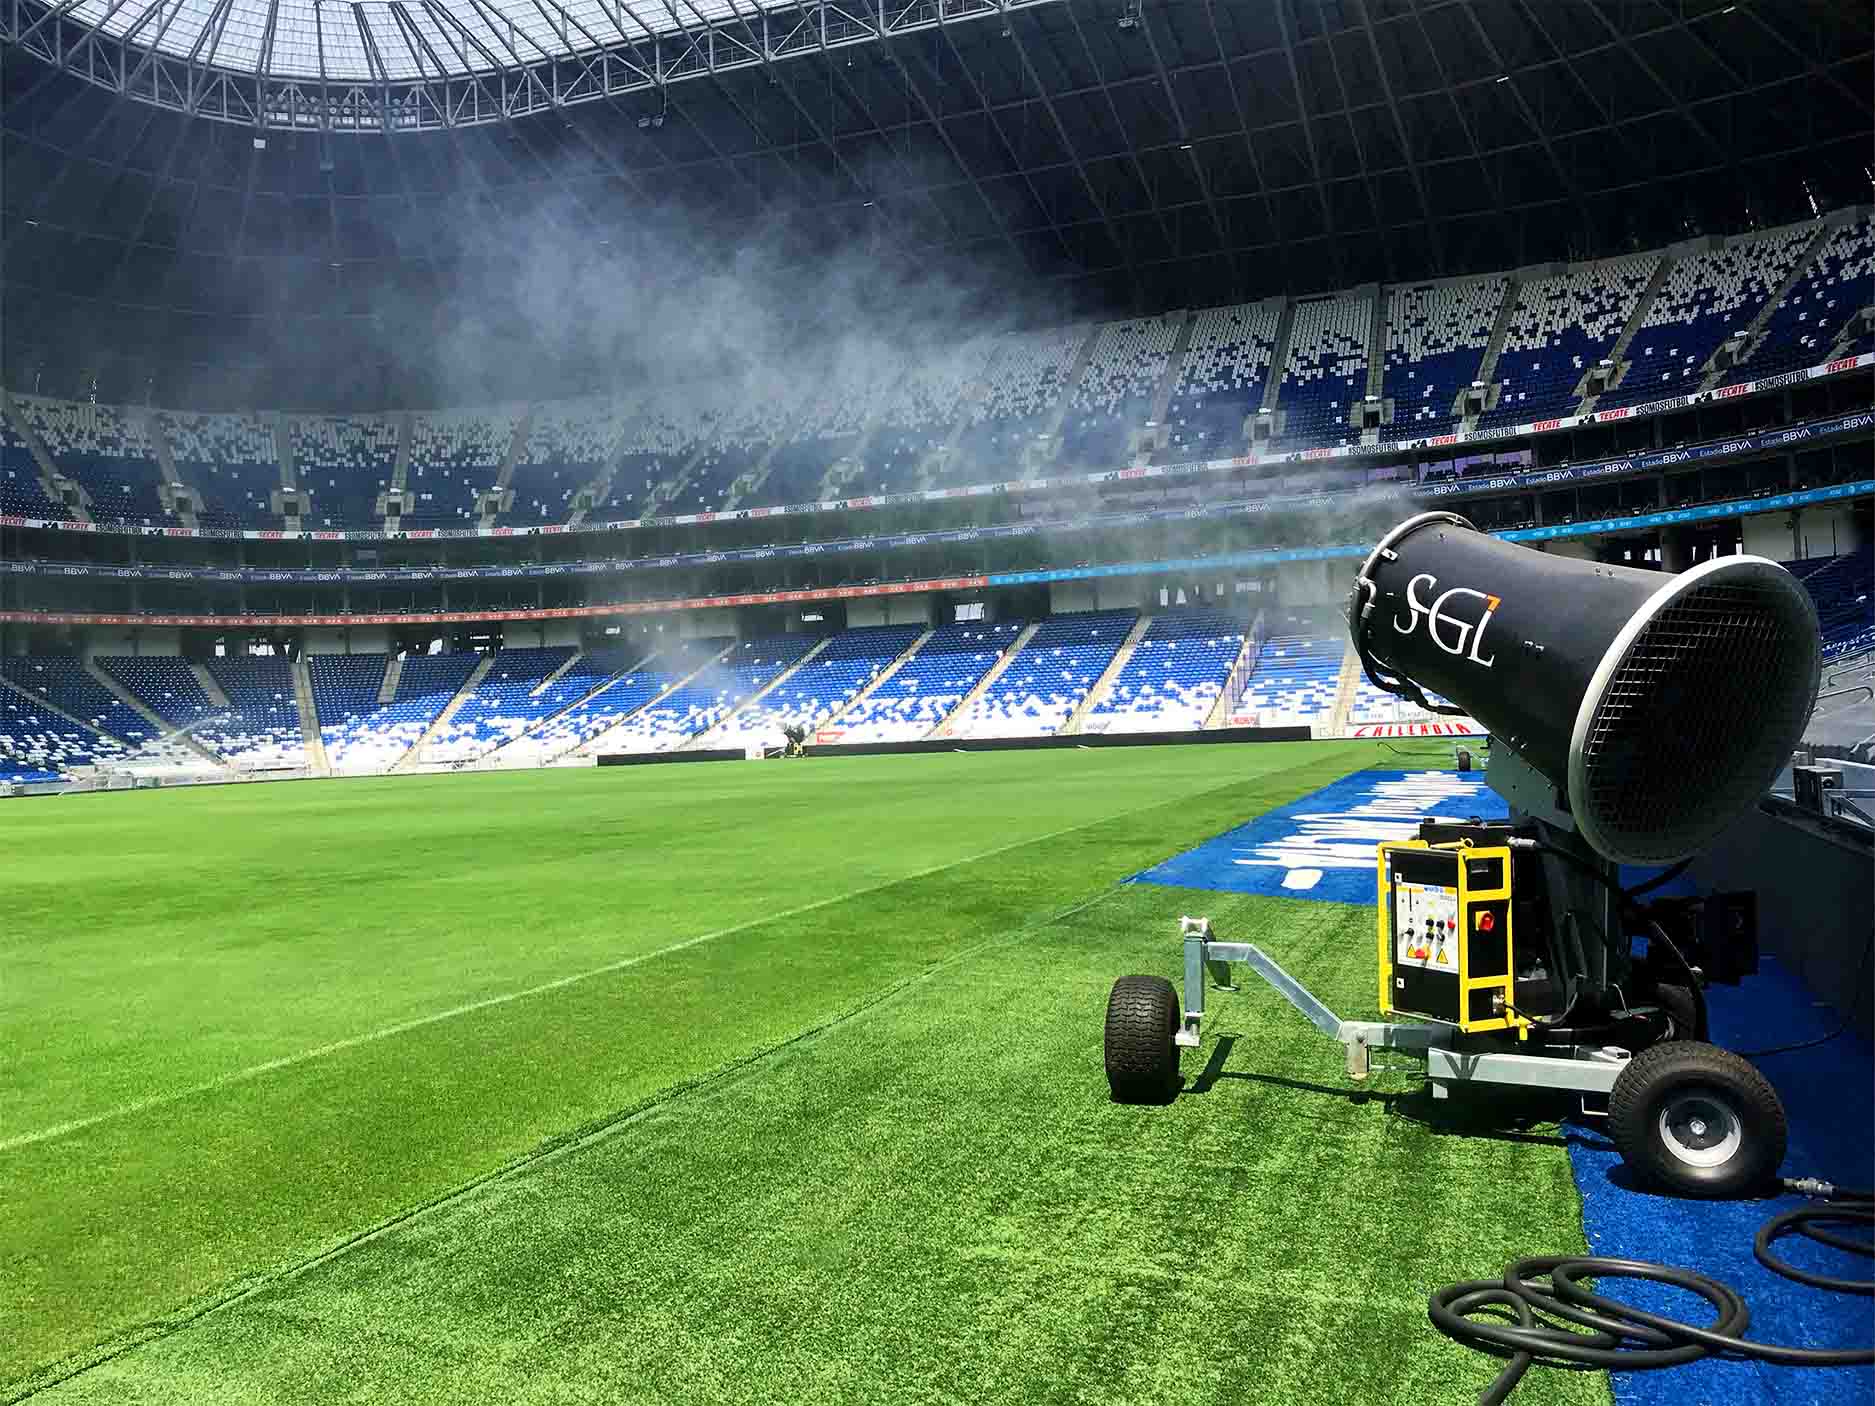 The SGL TC50 blows a spray of water across the pitch of the BBVA Stadium, home of C.F. Monterrey.